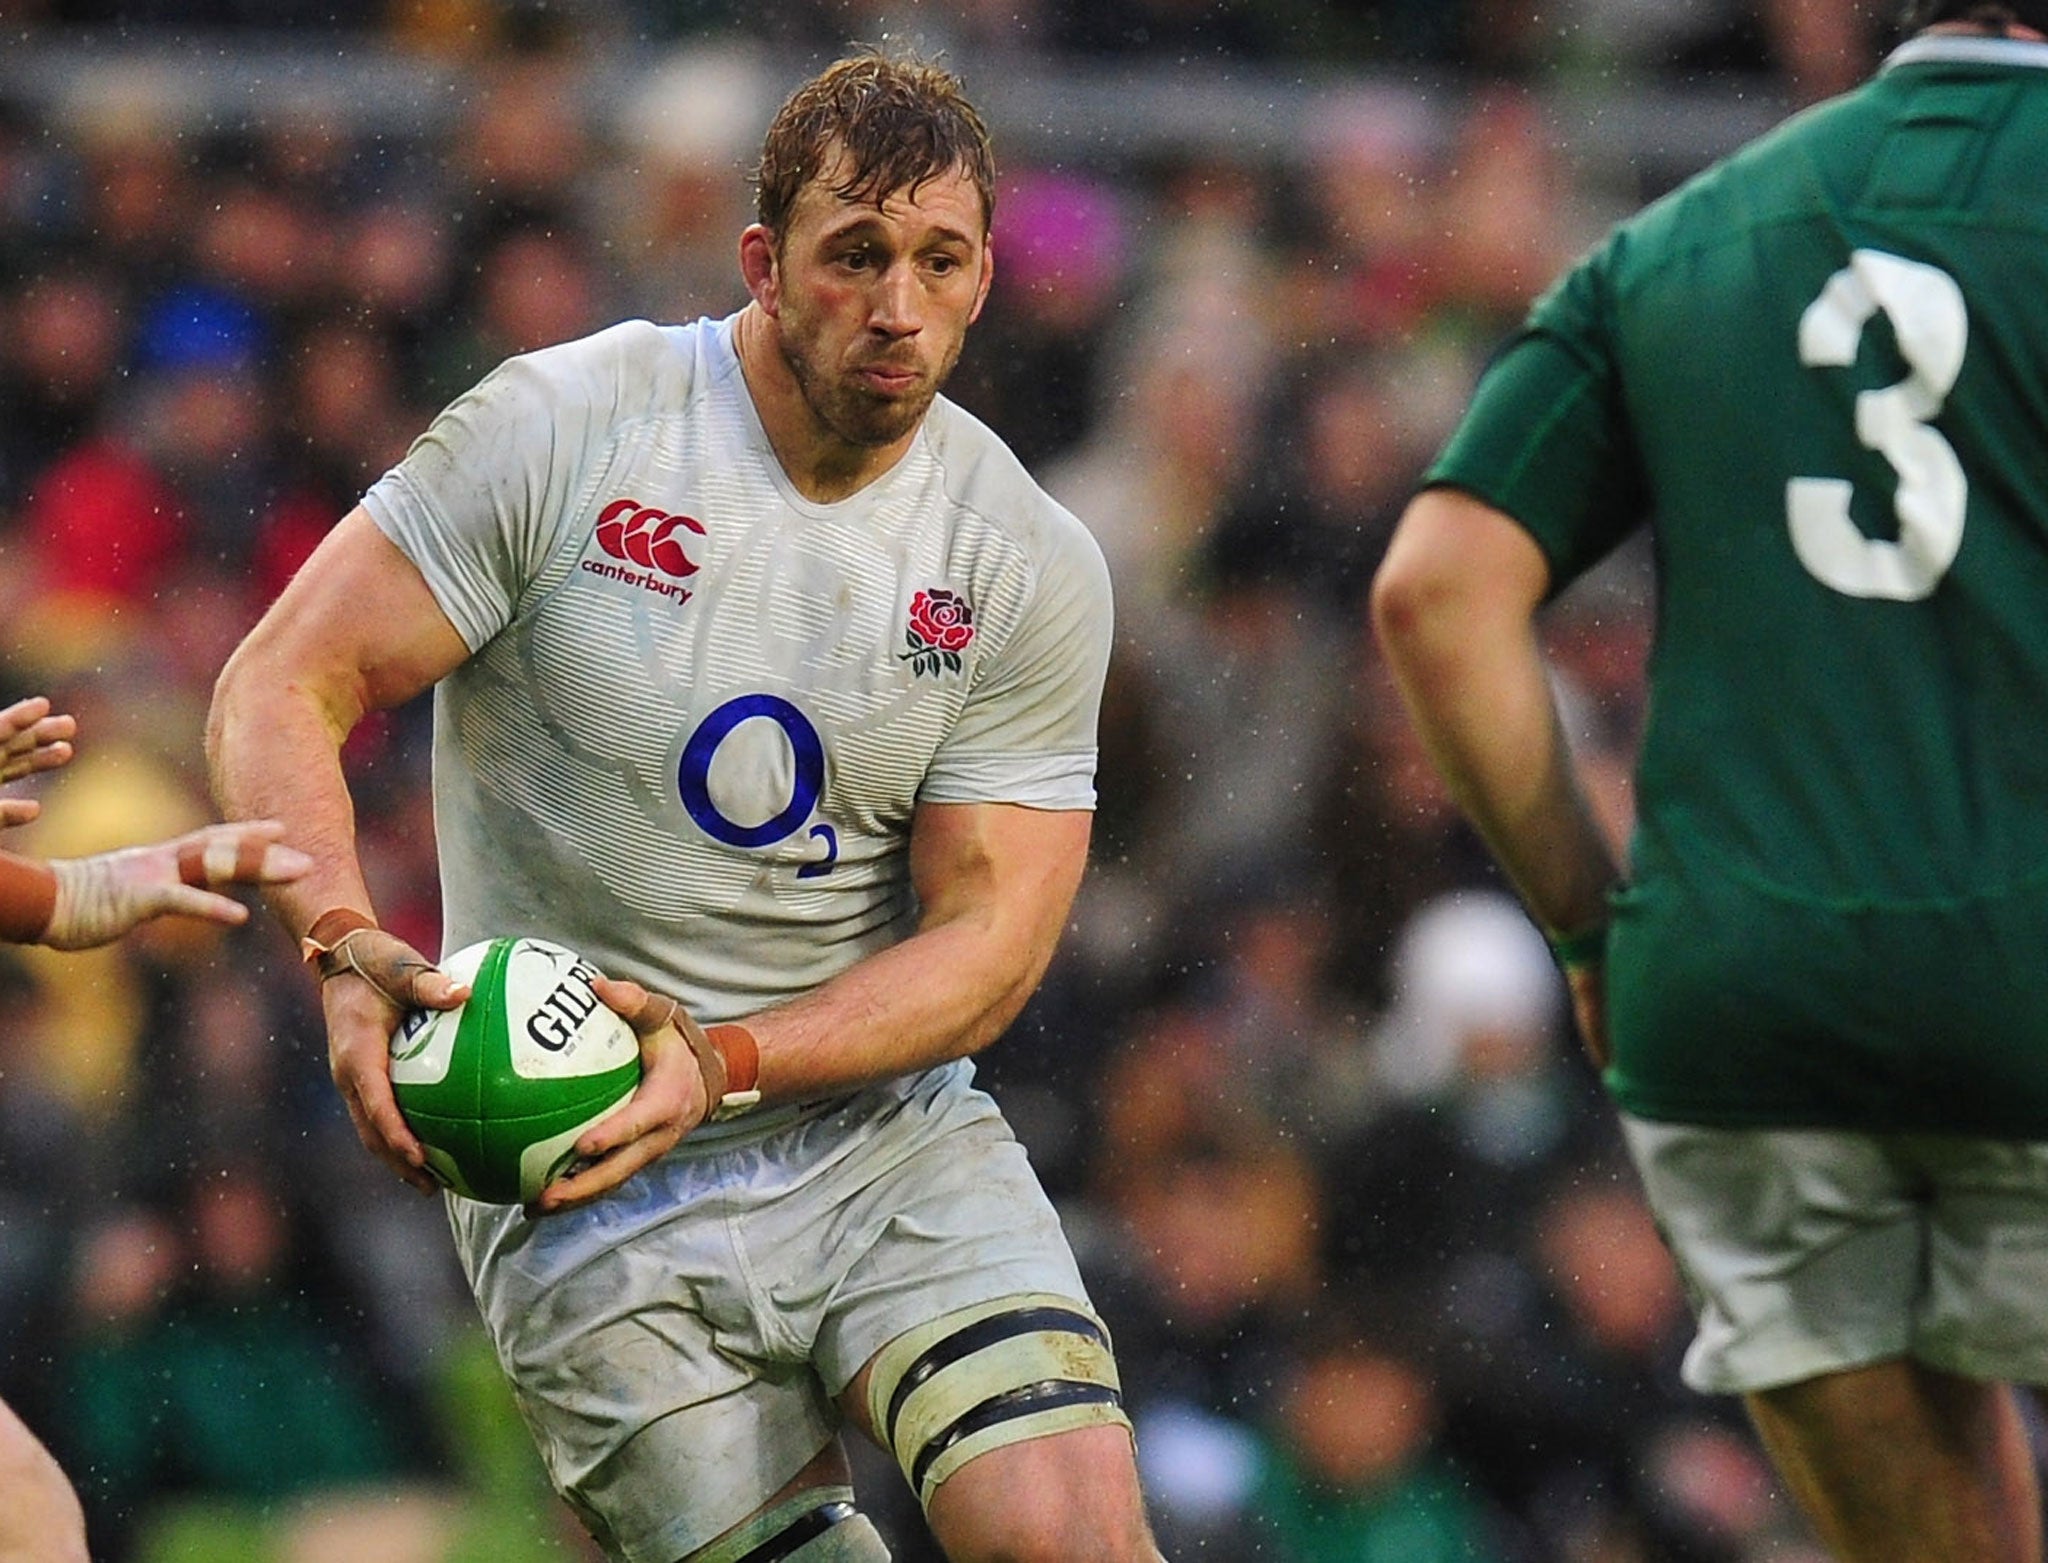 7 – Chris Robshaw (England) – The English captain led his side to a first victory in Ireland for 10 years. Brilliant defensively and always looked to ship the ball on from first receiver. Lead-from-the-front example shown by taking final line-out